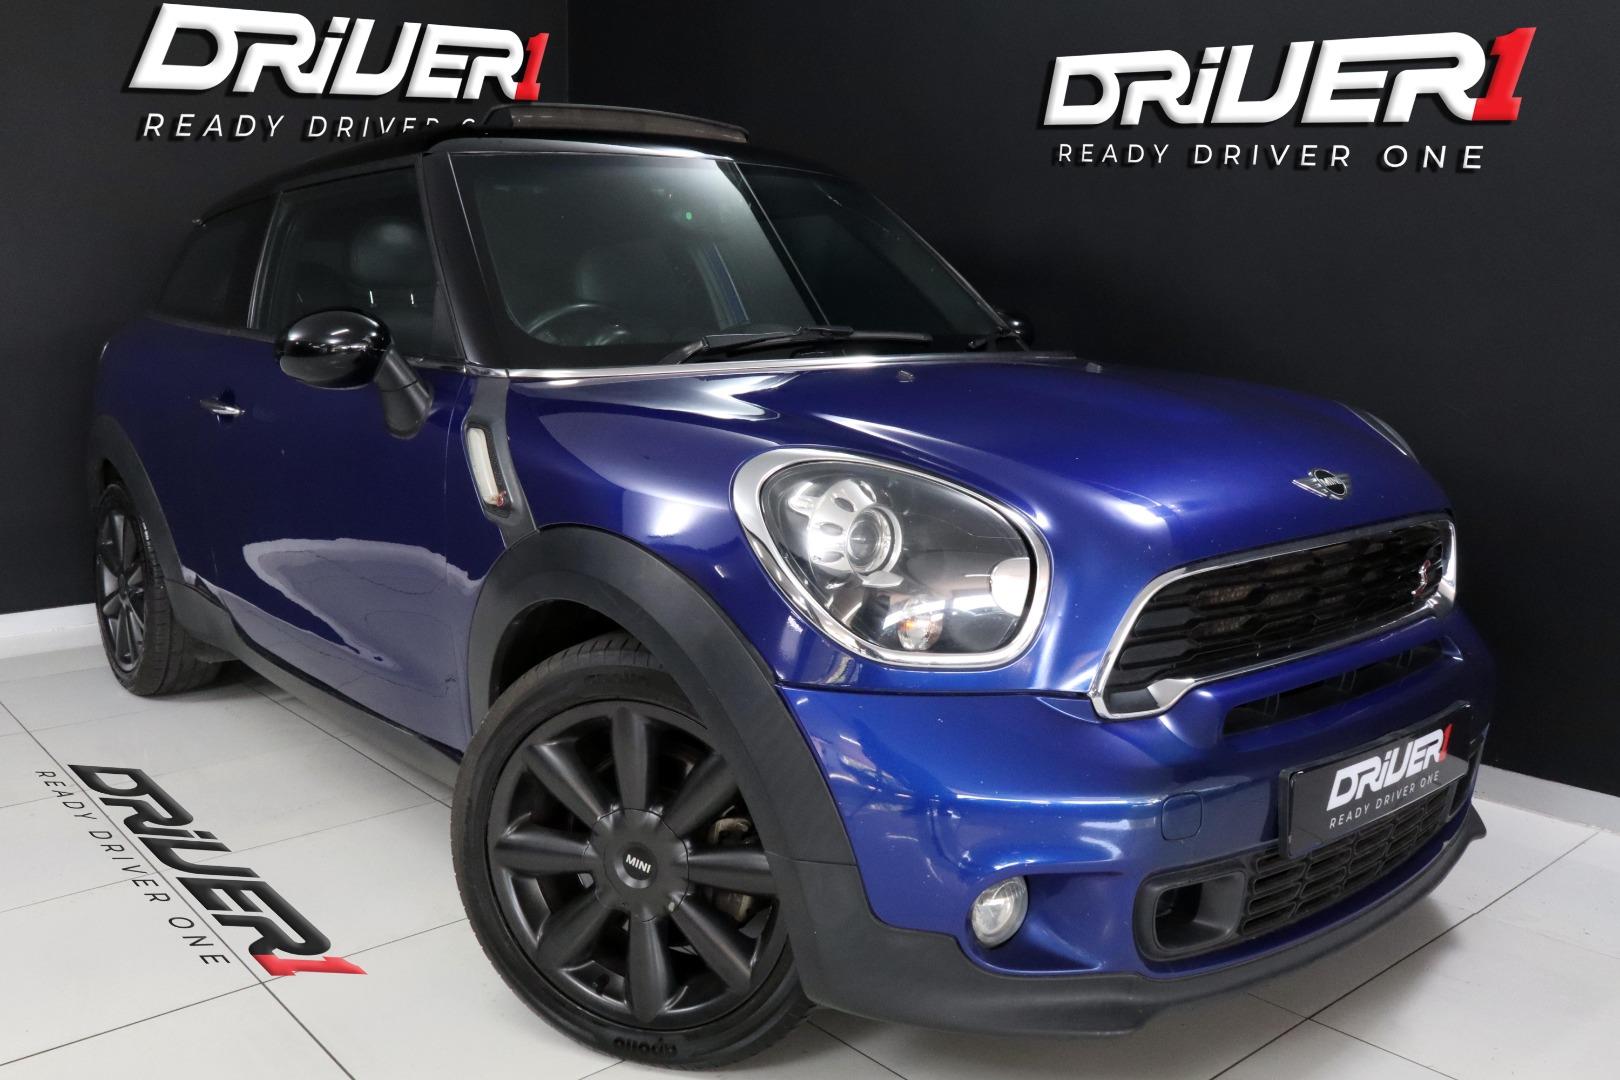 2015 MINI Paceman Cooper S Steptronic for sale - 329172